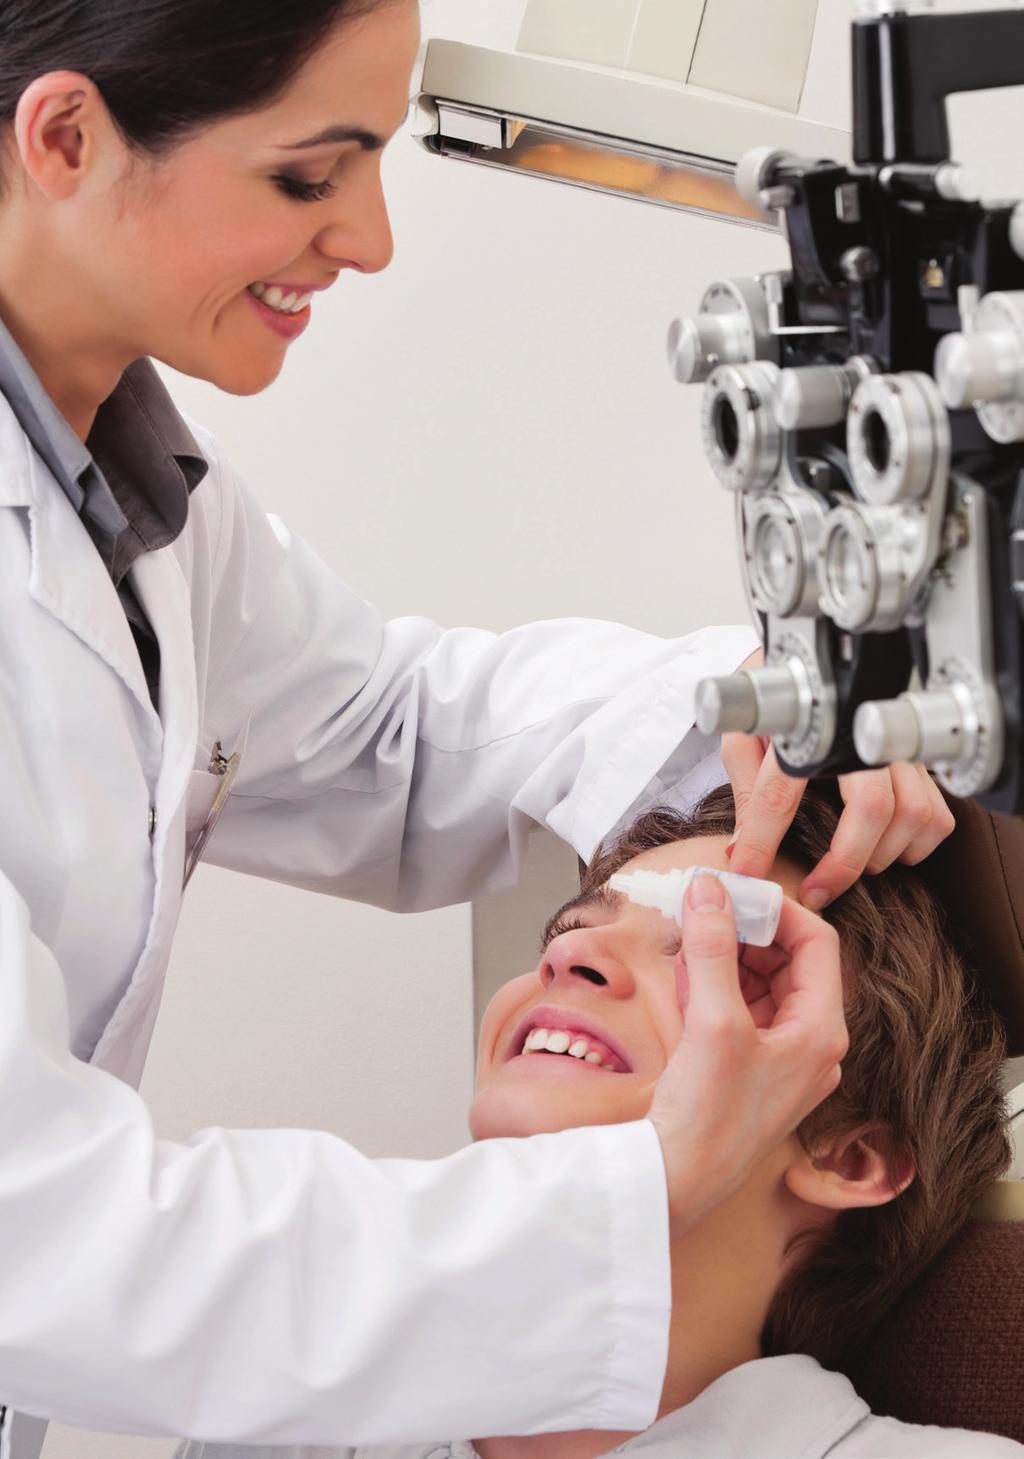 CONDITIONS THAT ARE TREATED BY LASIK There are three important components of your eyes anatomy responsible for eyesight: The cornea, the lens, and the retina.